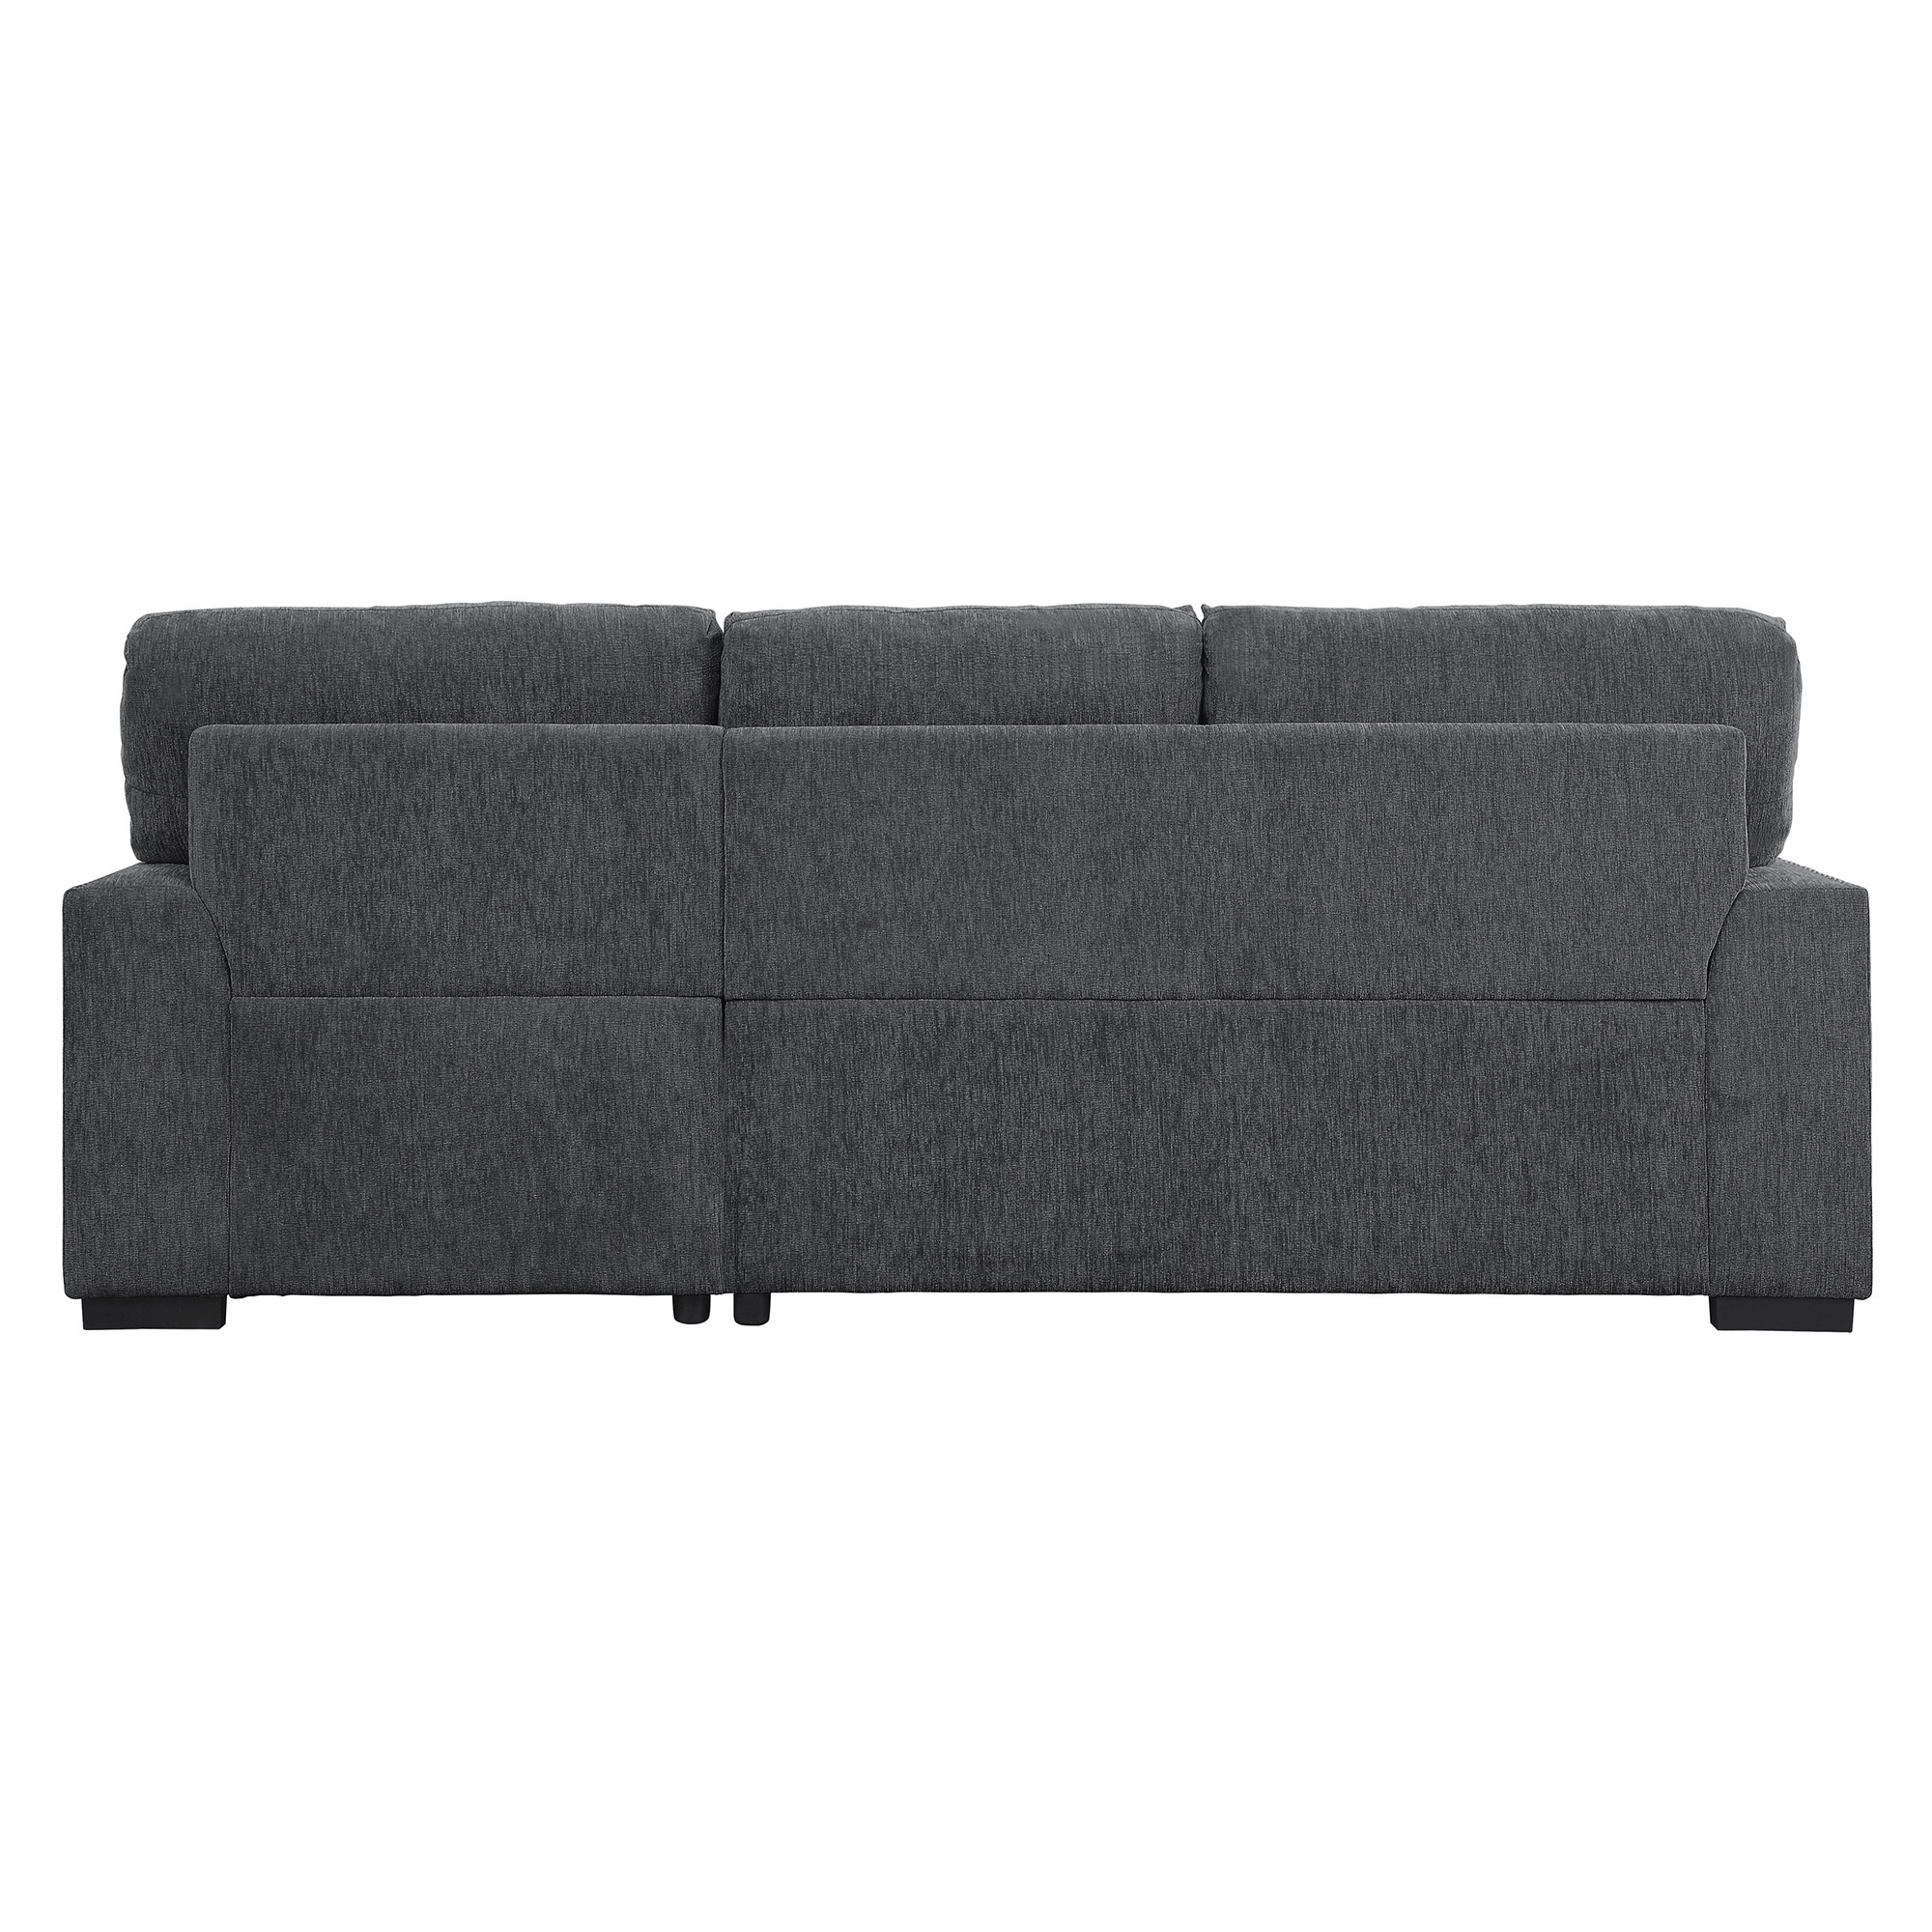 Lazzara Home Driggs 96 in. W Chenille Upholstery 2-Piece Sectional Sofa in Charcoal w/ Pull-out Bed and Right Chaise with Hidden Storage